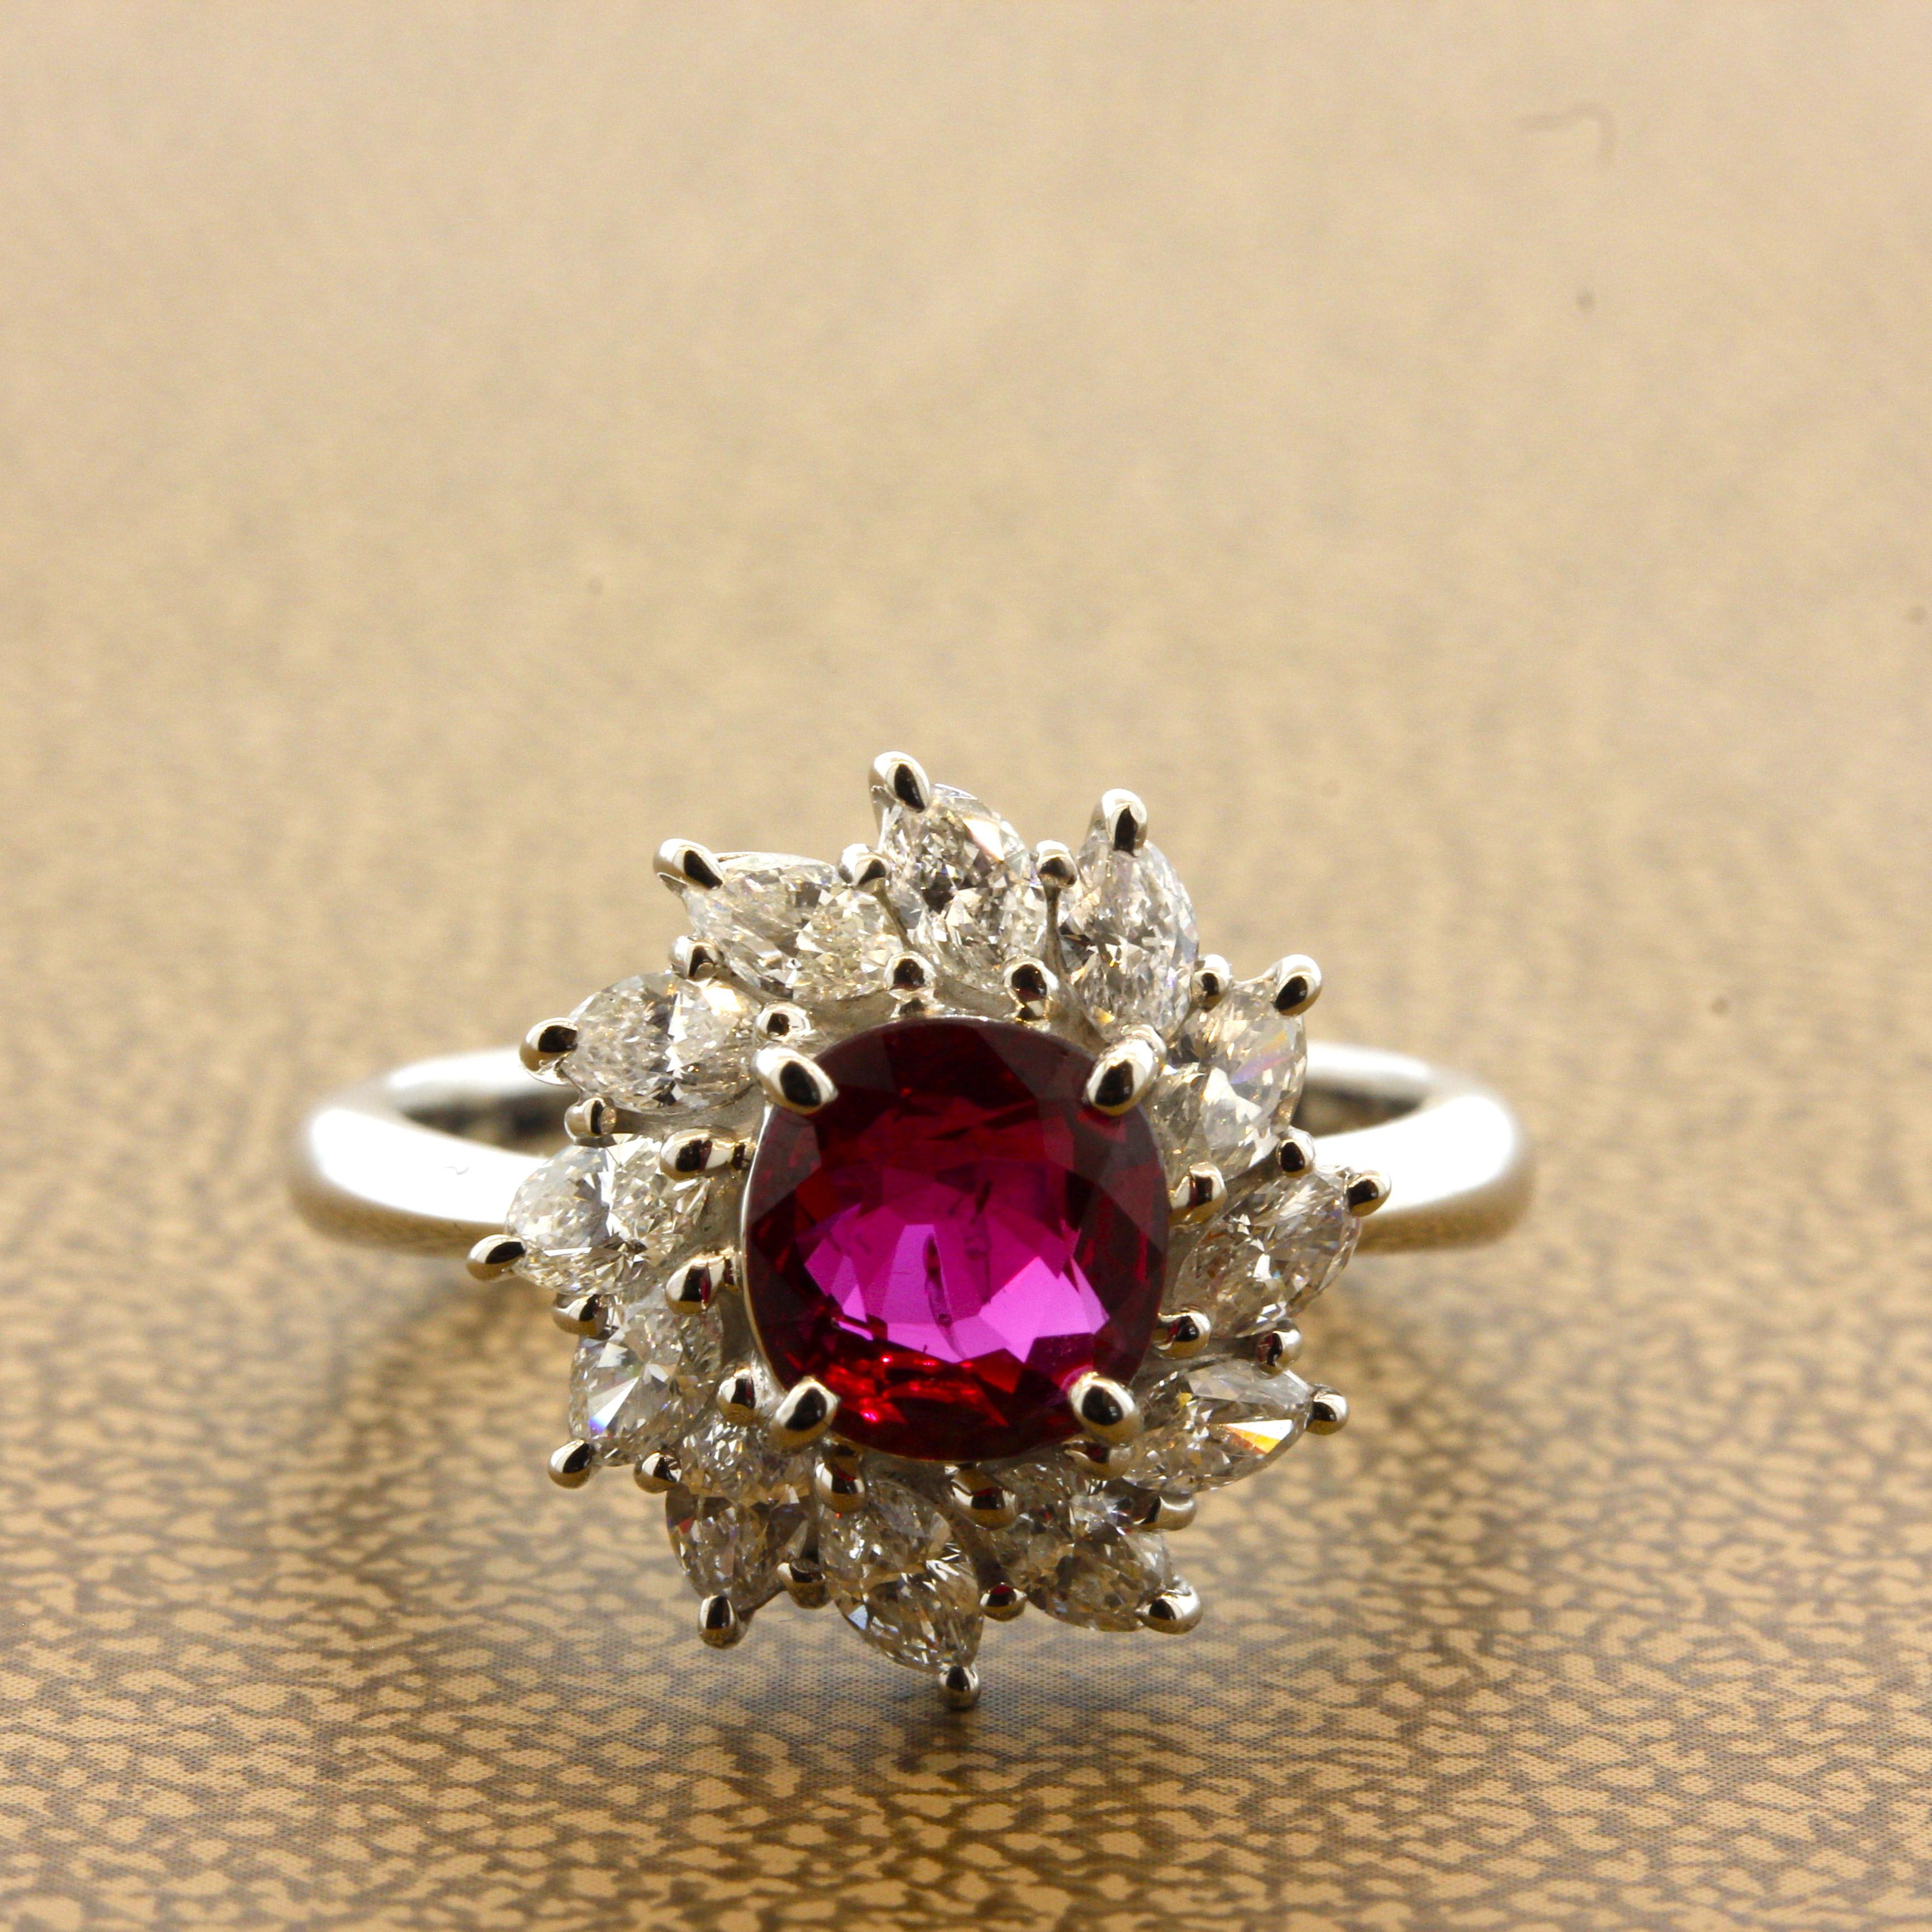 A stylish platinum made ring featuring a fine natural ruby weighing 1.42 carats. It has a lovely cushion shape along with a rich vivid red color which is still bright and brilliant, a fine stone. It is complemented by 0.96 carats of marquise shape